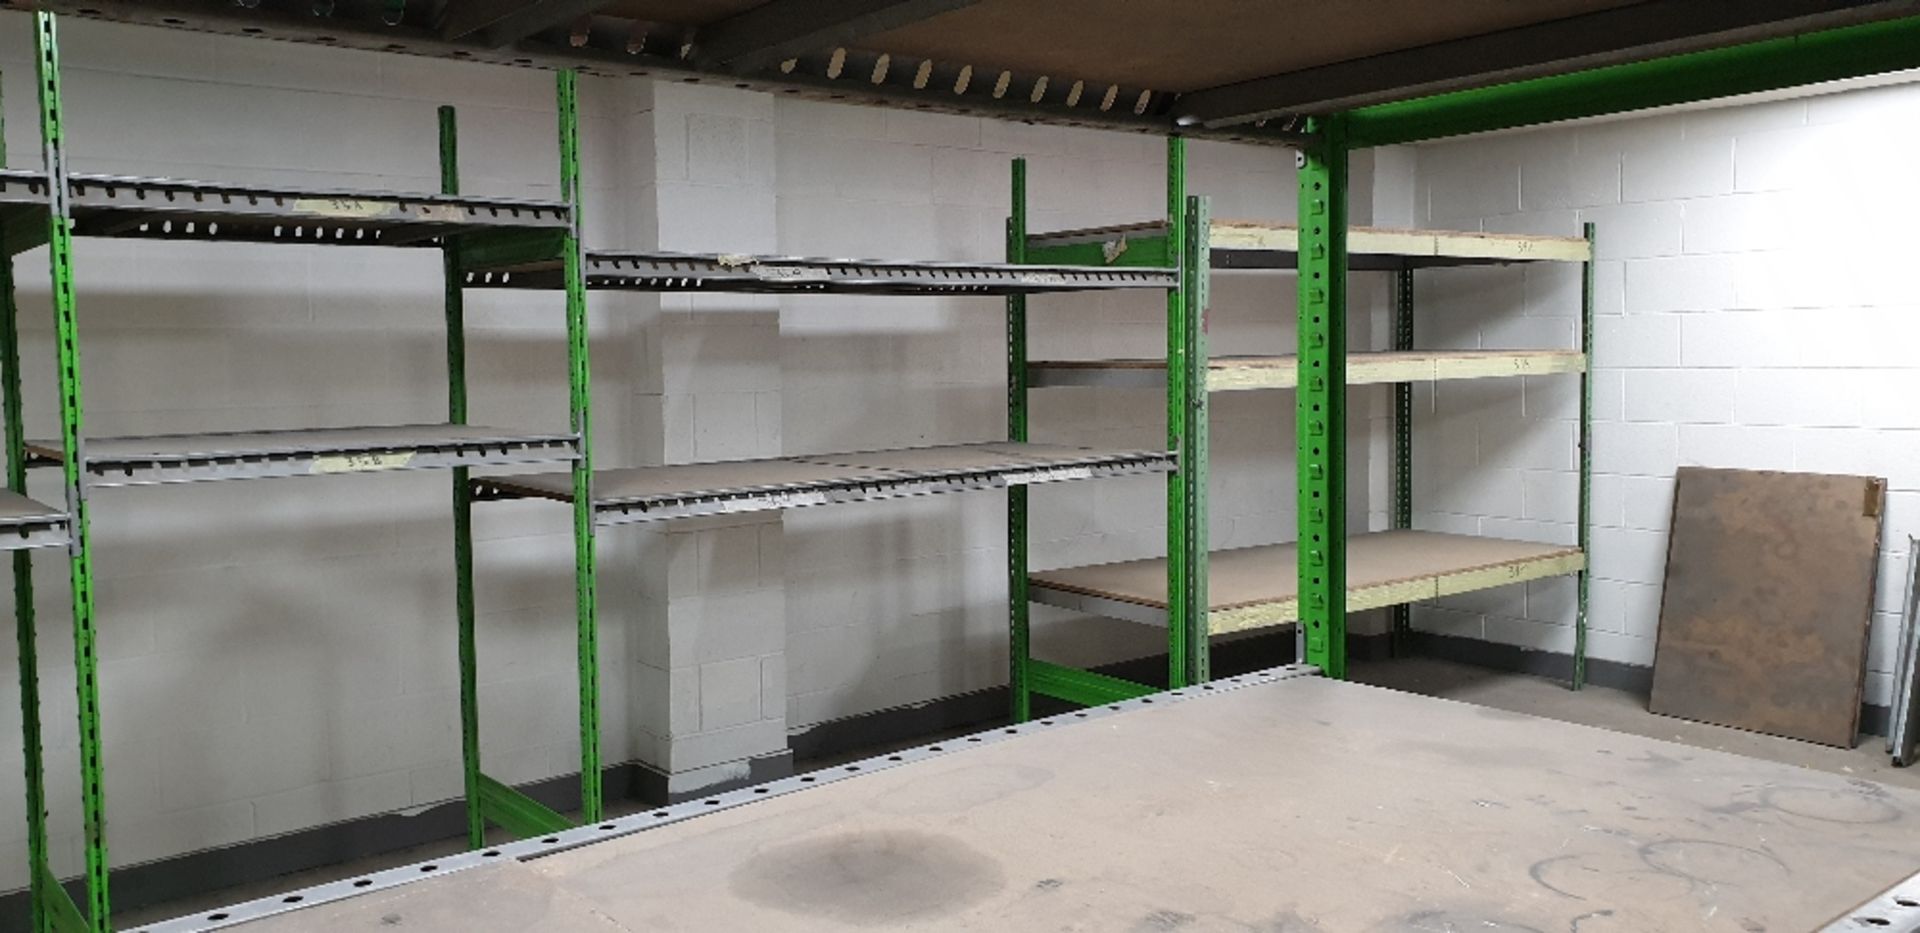 13 - bays of adjustable boltless shelving (bay size 2000m x 800m x 2200mm high) - Image 4 of 4